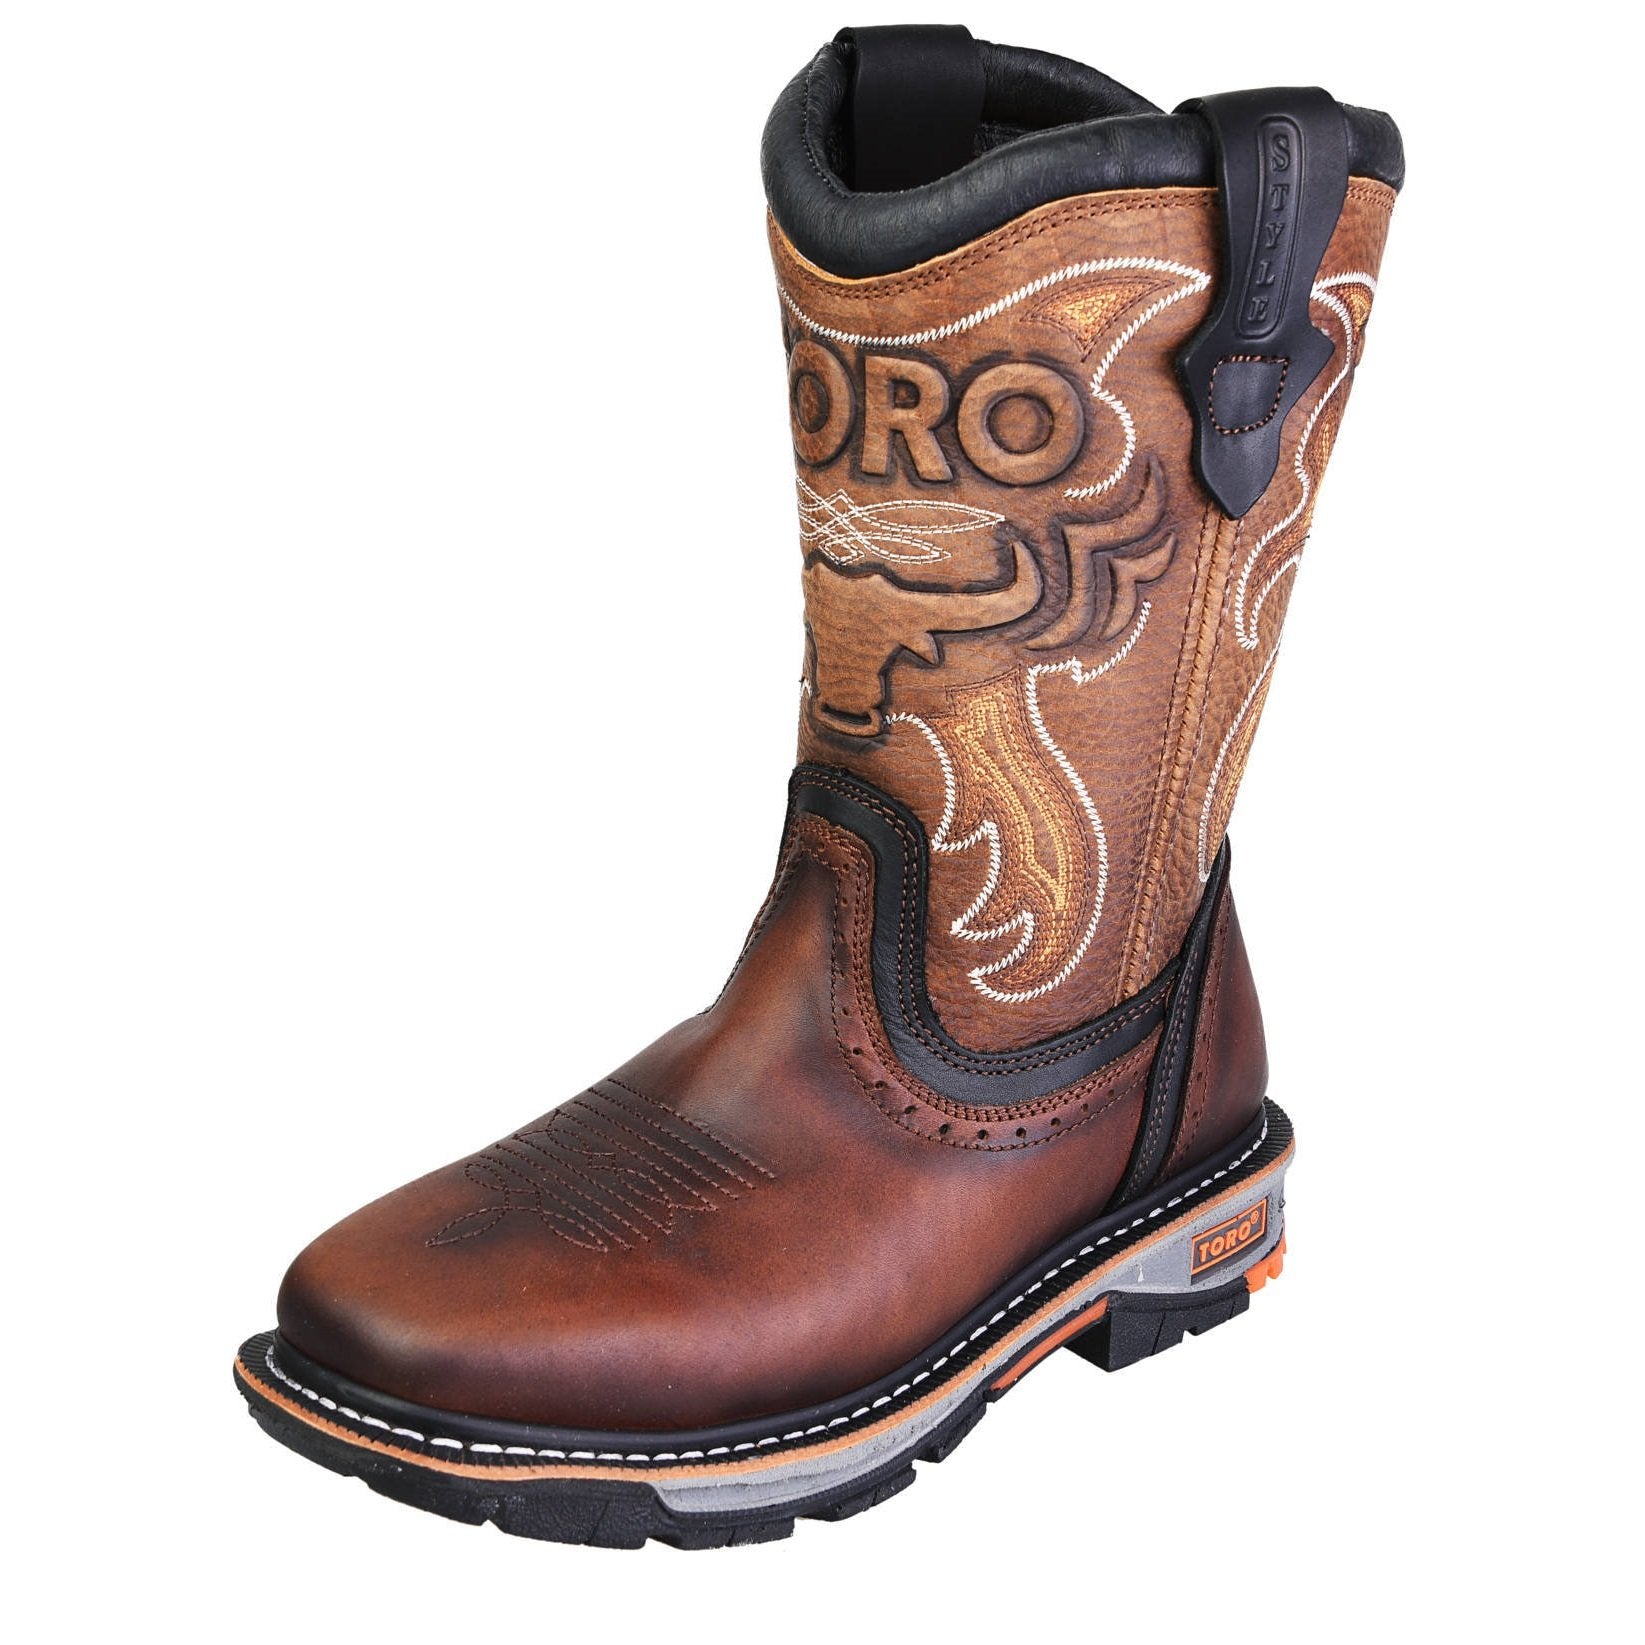 Men's Work Boots - 3-Layer Sole & Soft Toe - Brown Work Boots - Toro Bravo - Pull On Work Boots - Brown Wellington Work Boots